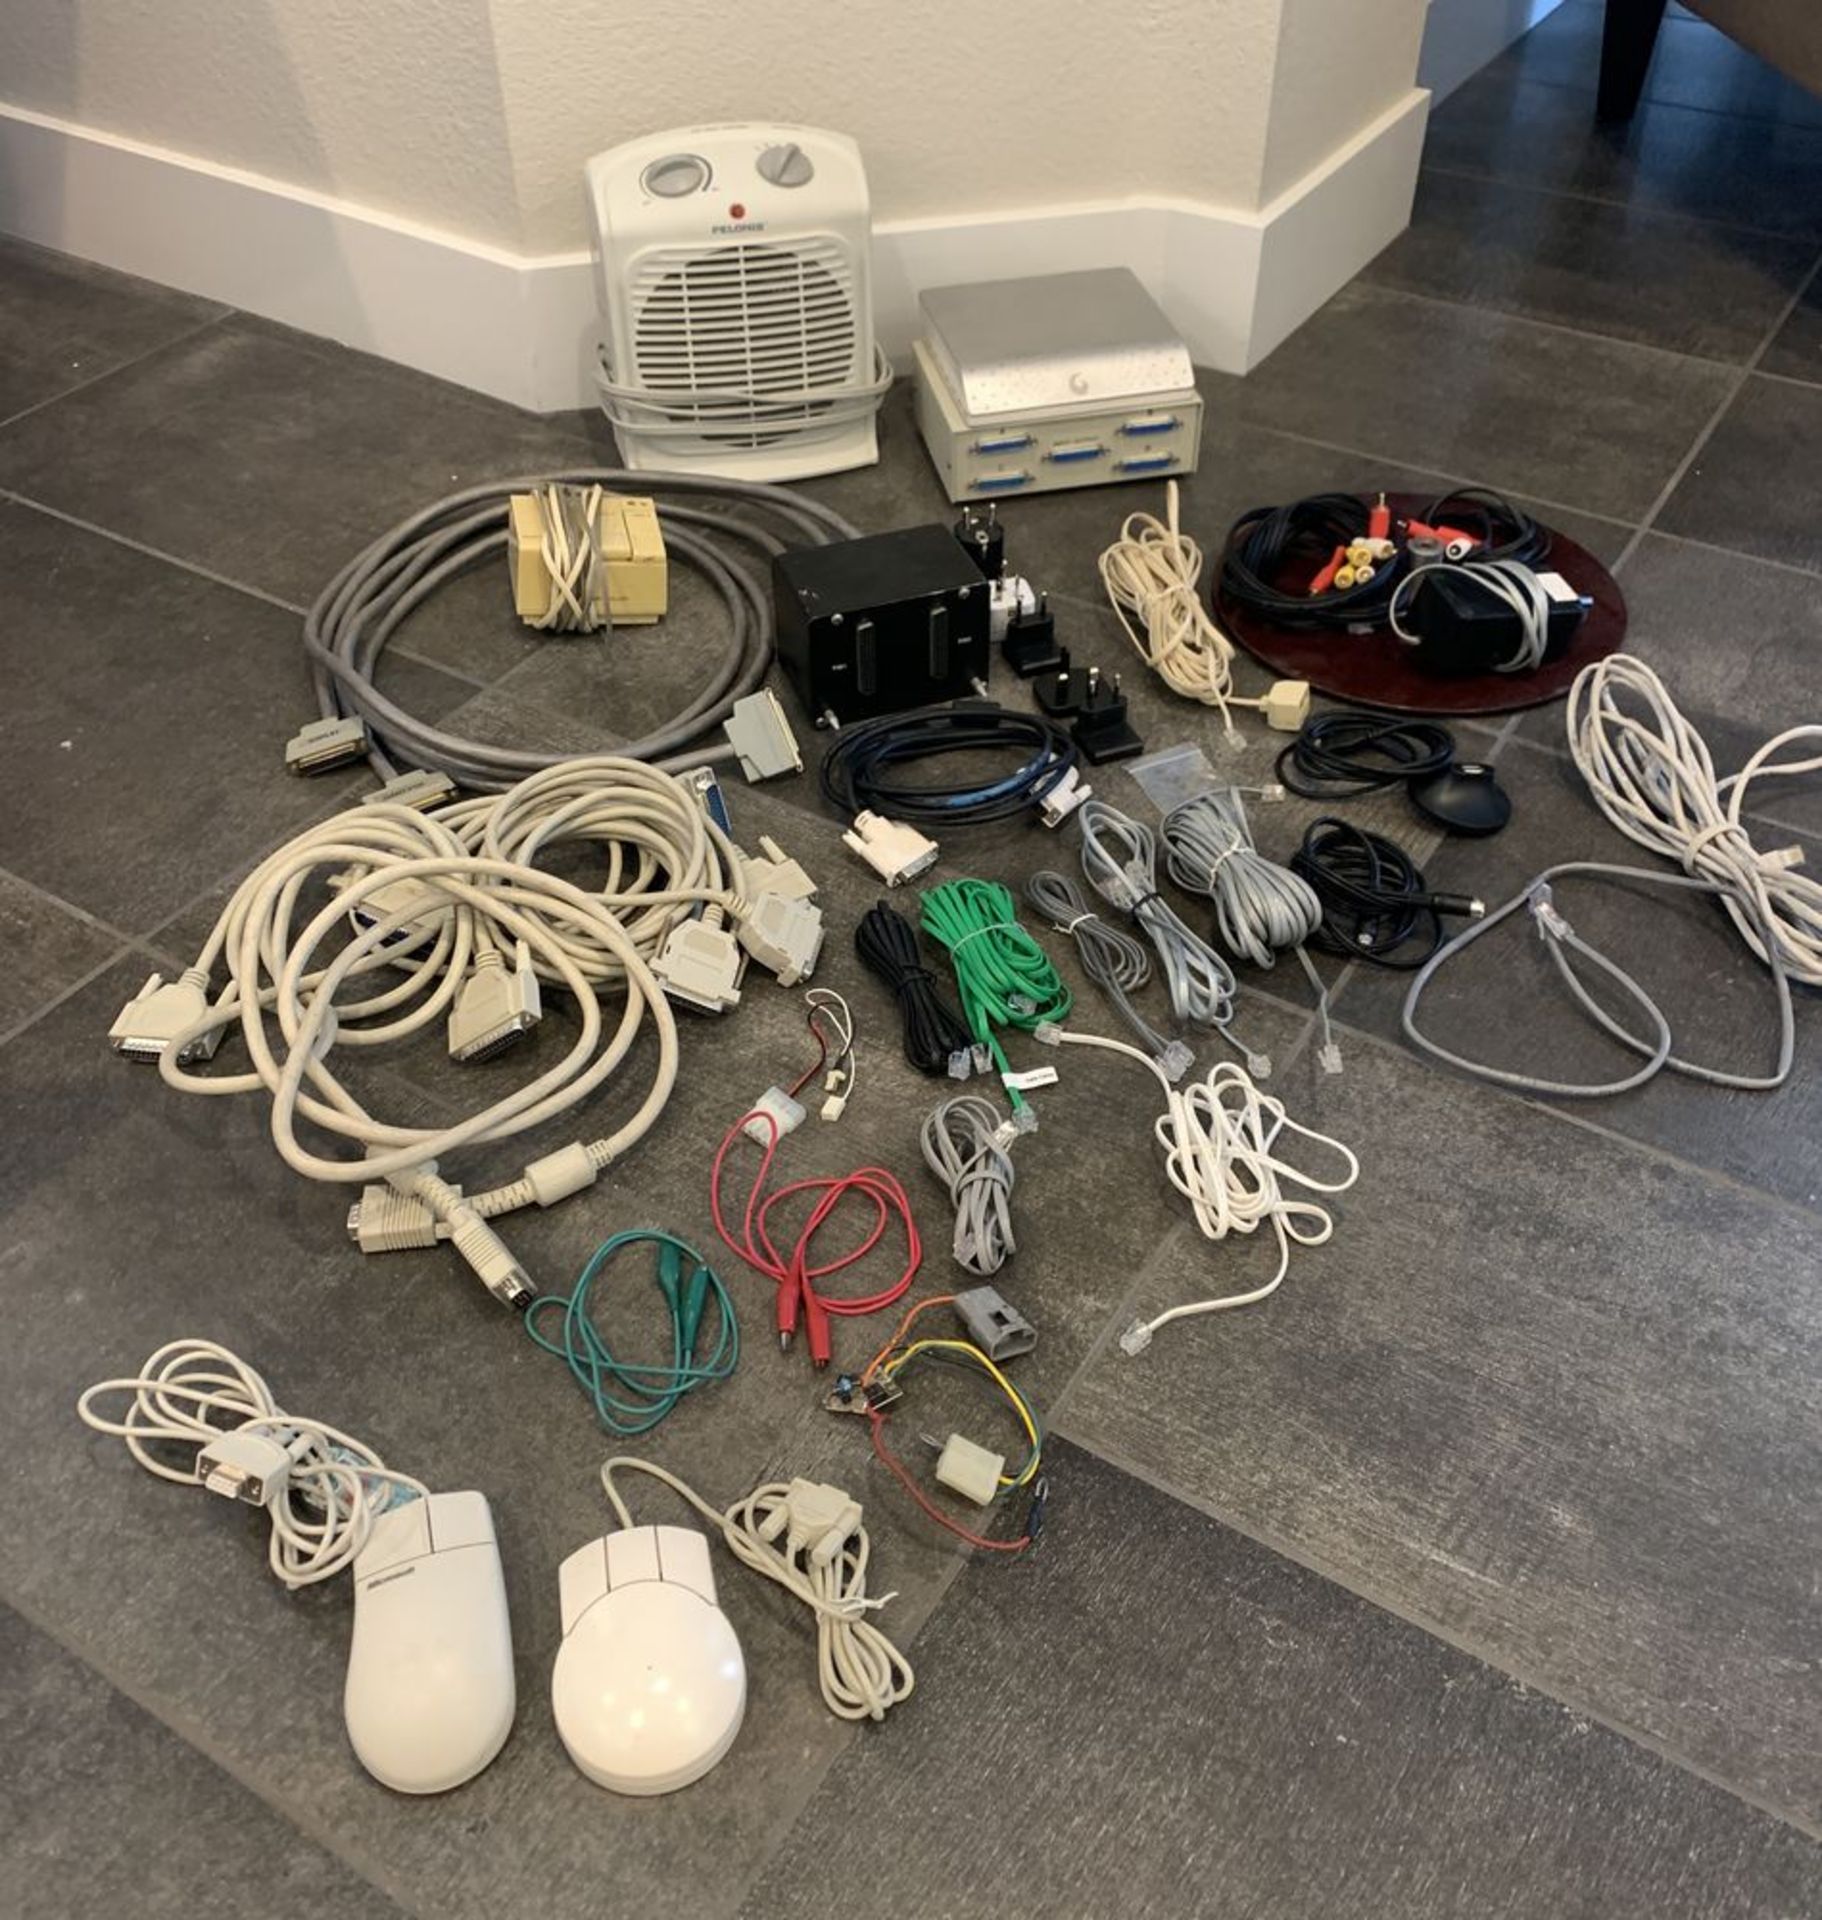 LARGE MIXED LOT OF ELECTRONICS, COMPUTER ITEMS CABLES AND MORE